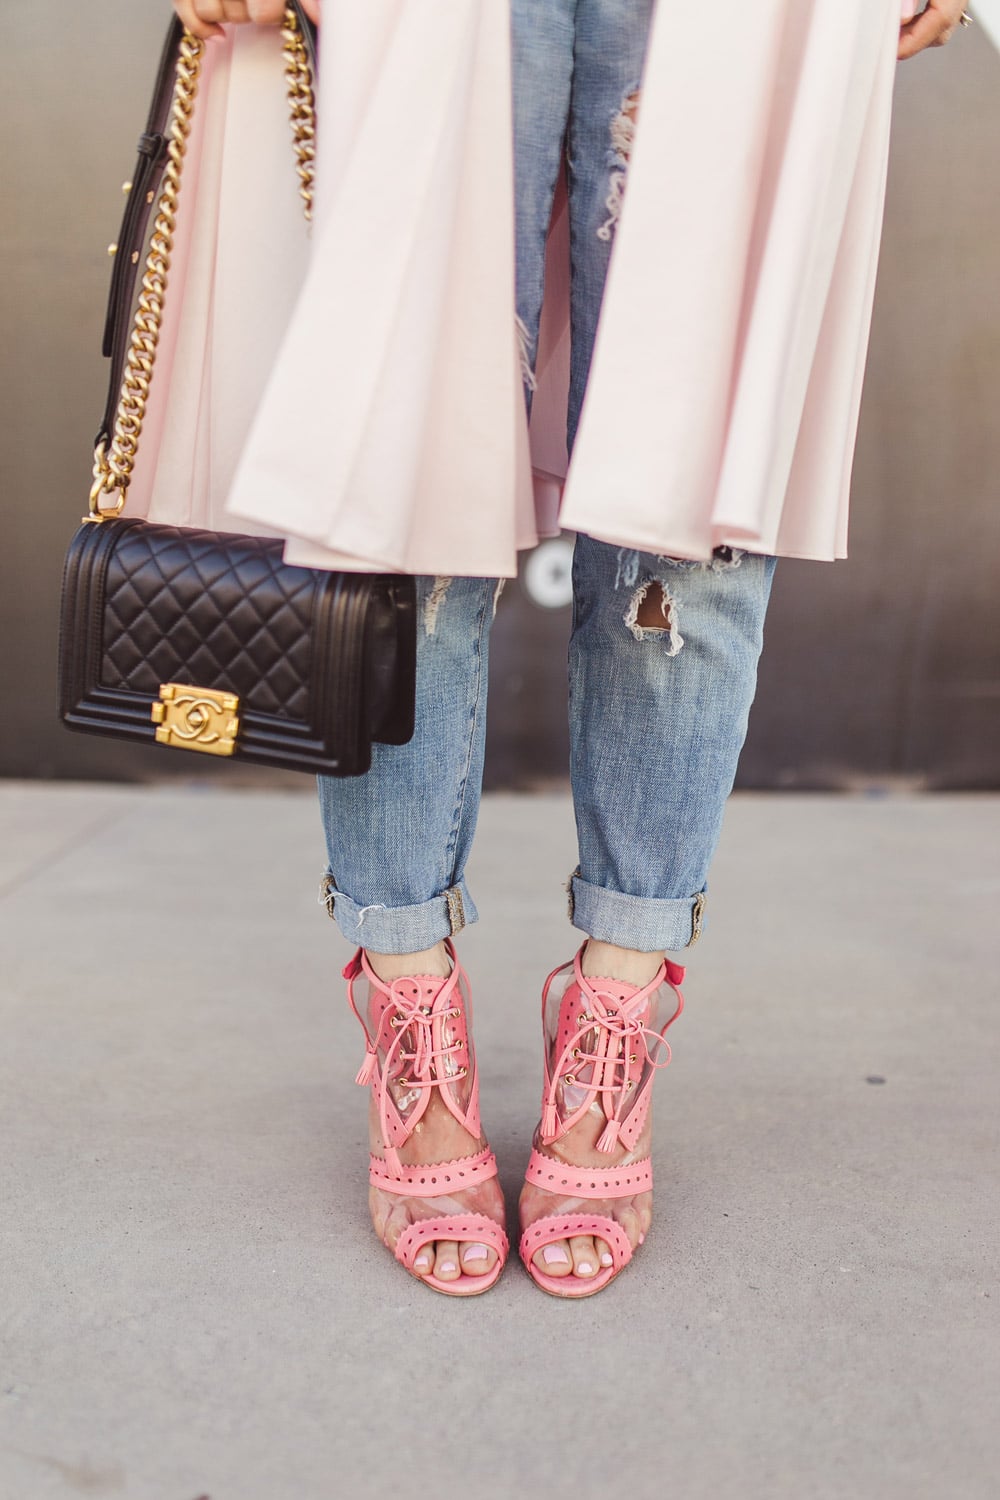 charles youssef pink pleated tunic top with boyfriend jeans, oscar de la renta pink oxford heels and chanel boy bag